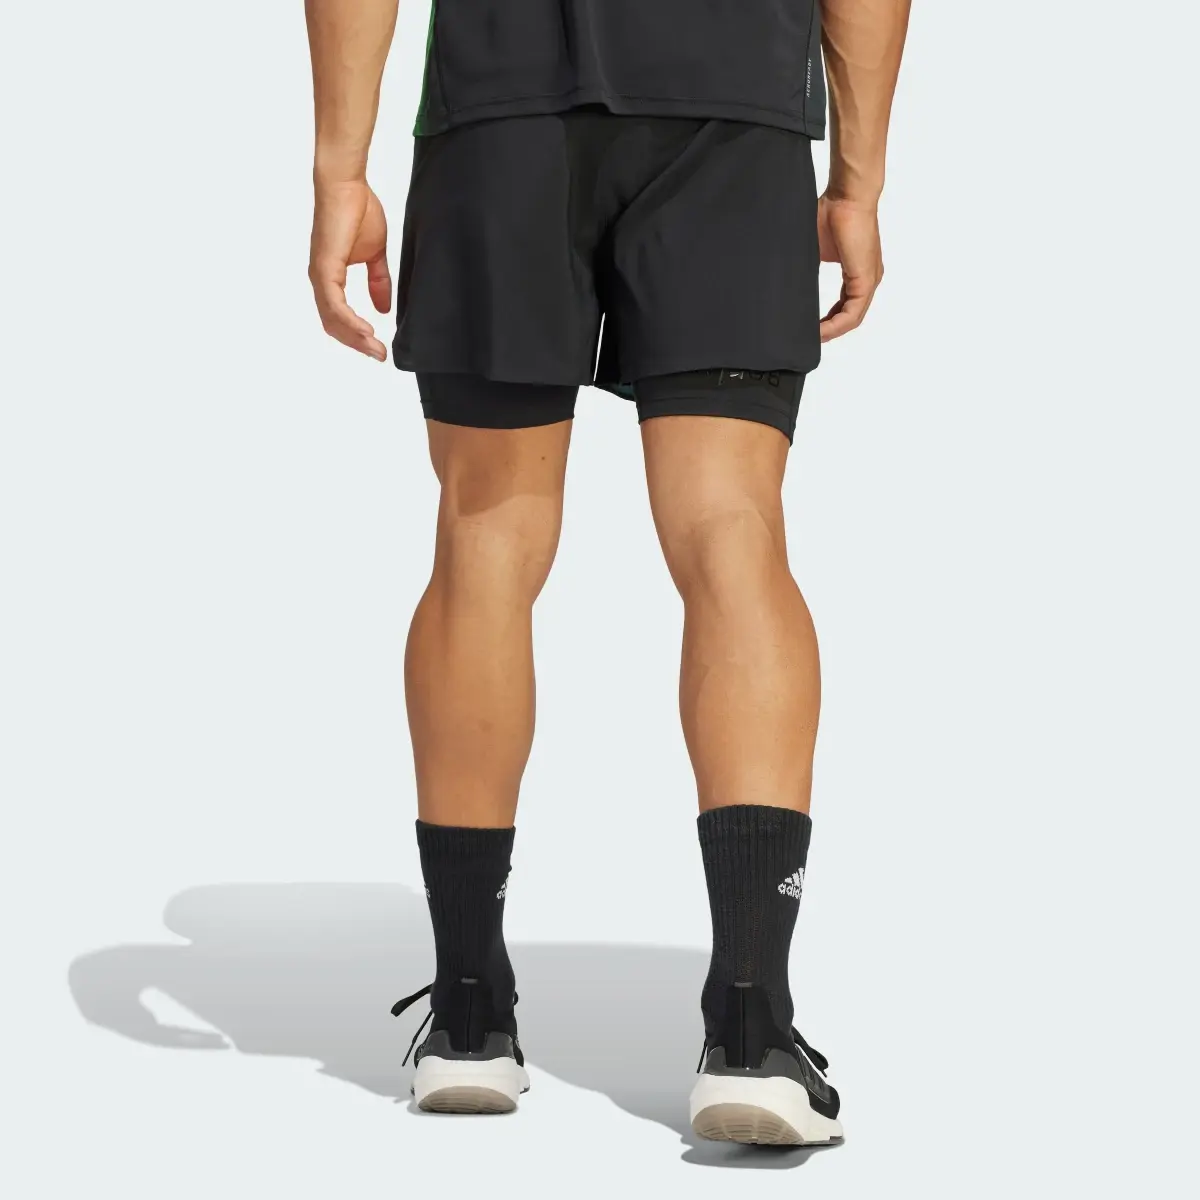 Adidas Berlin Running Two-in-One Shorts. 2